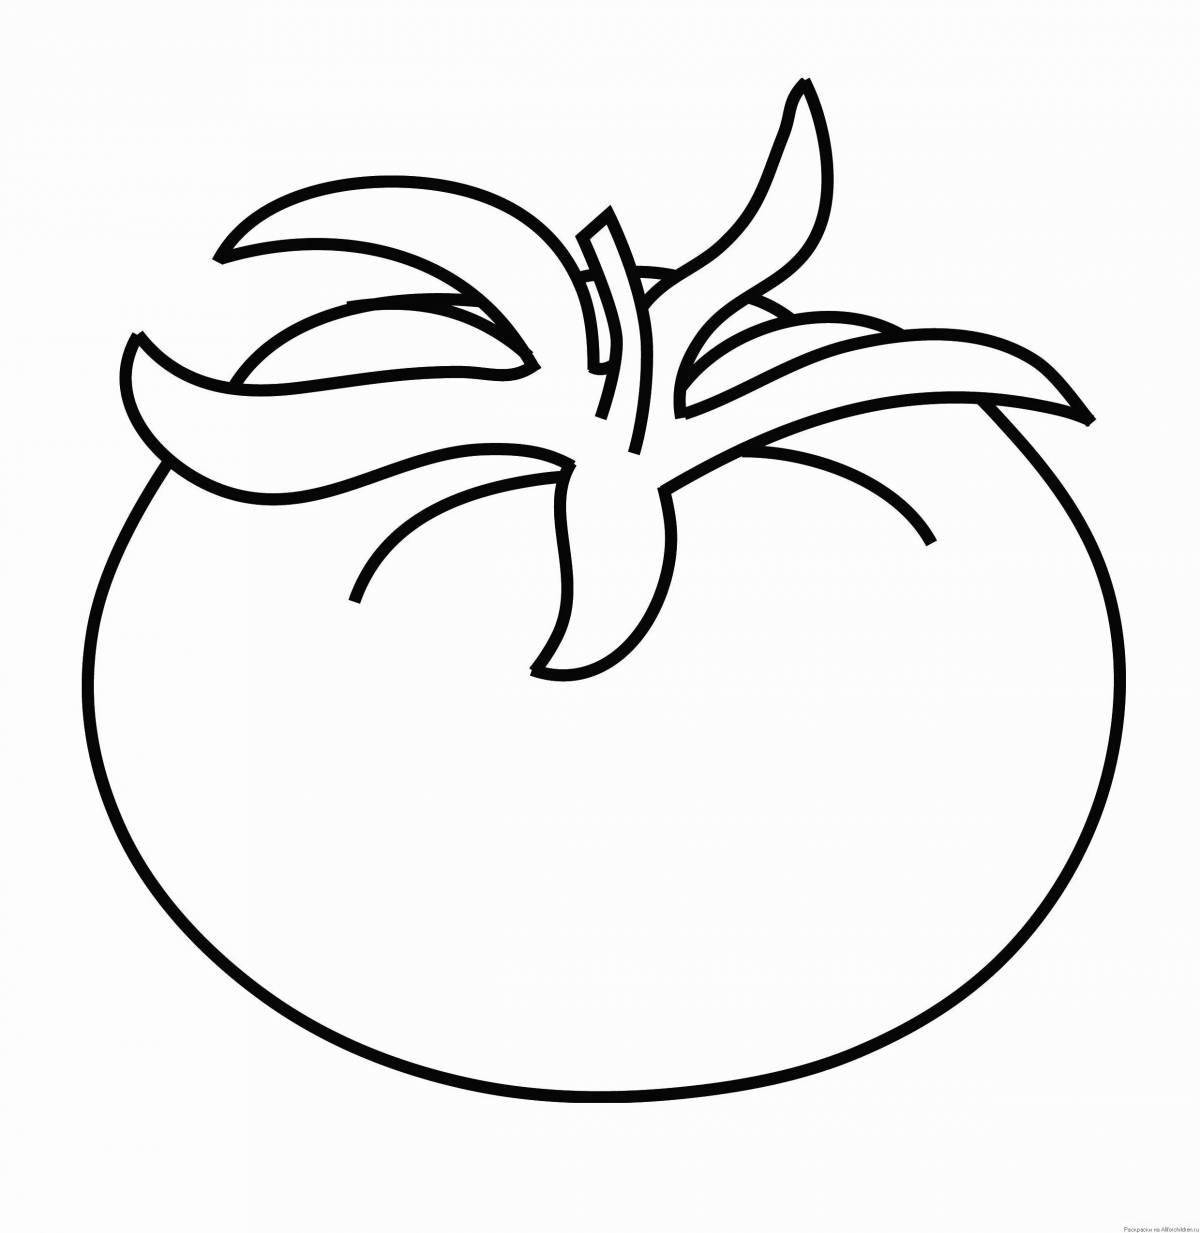 Amazing tomato coloring page